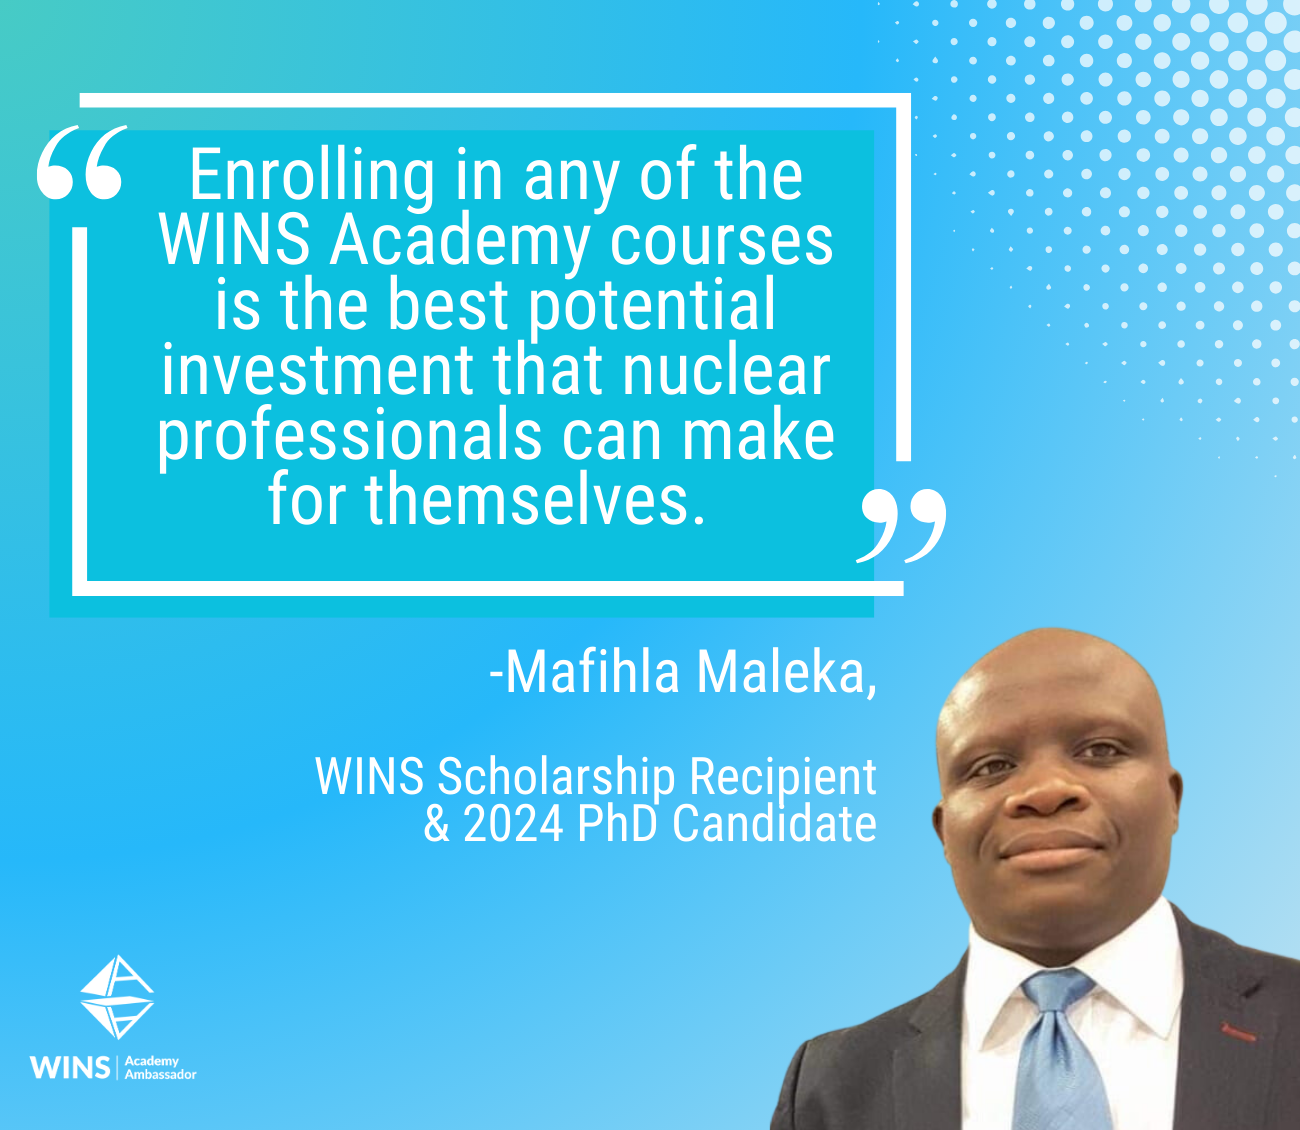 WINS Scholarship Recipient Mafihla Maleka Uses Knowledge Gained at the WINS Academy in Dissertation